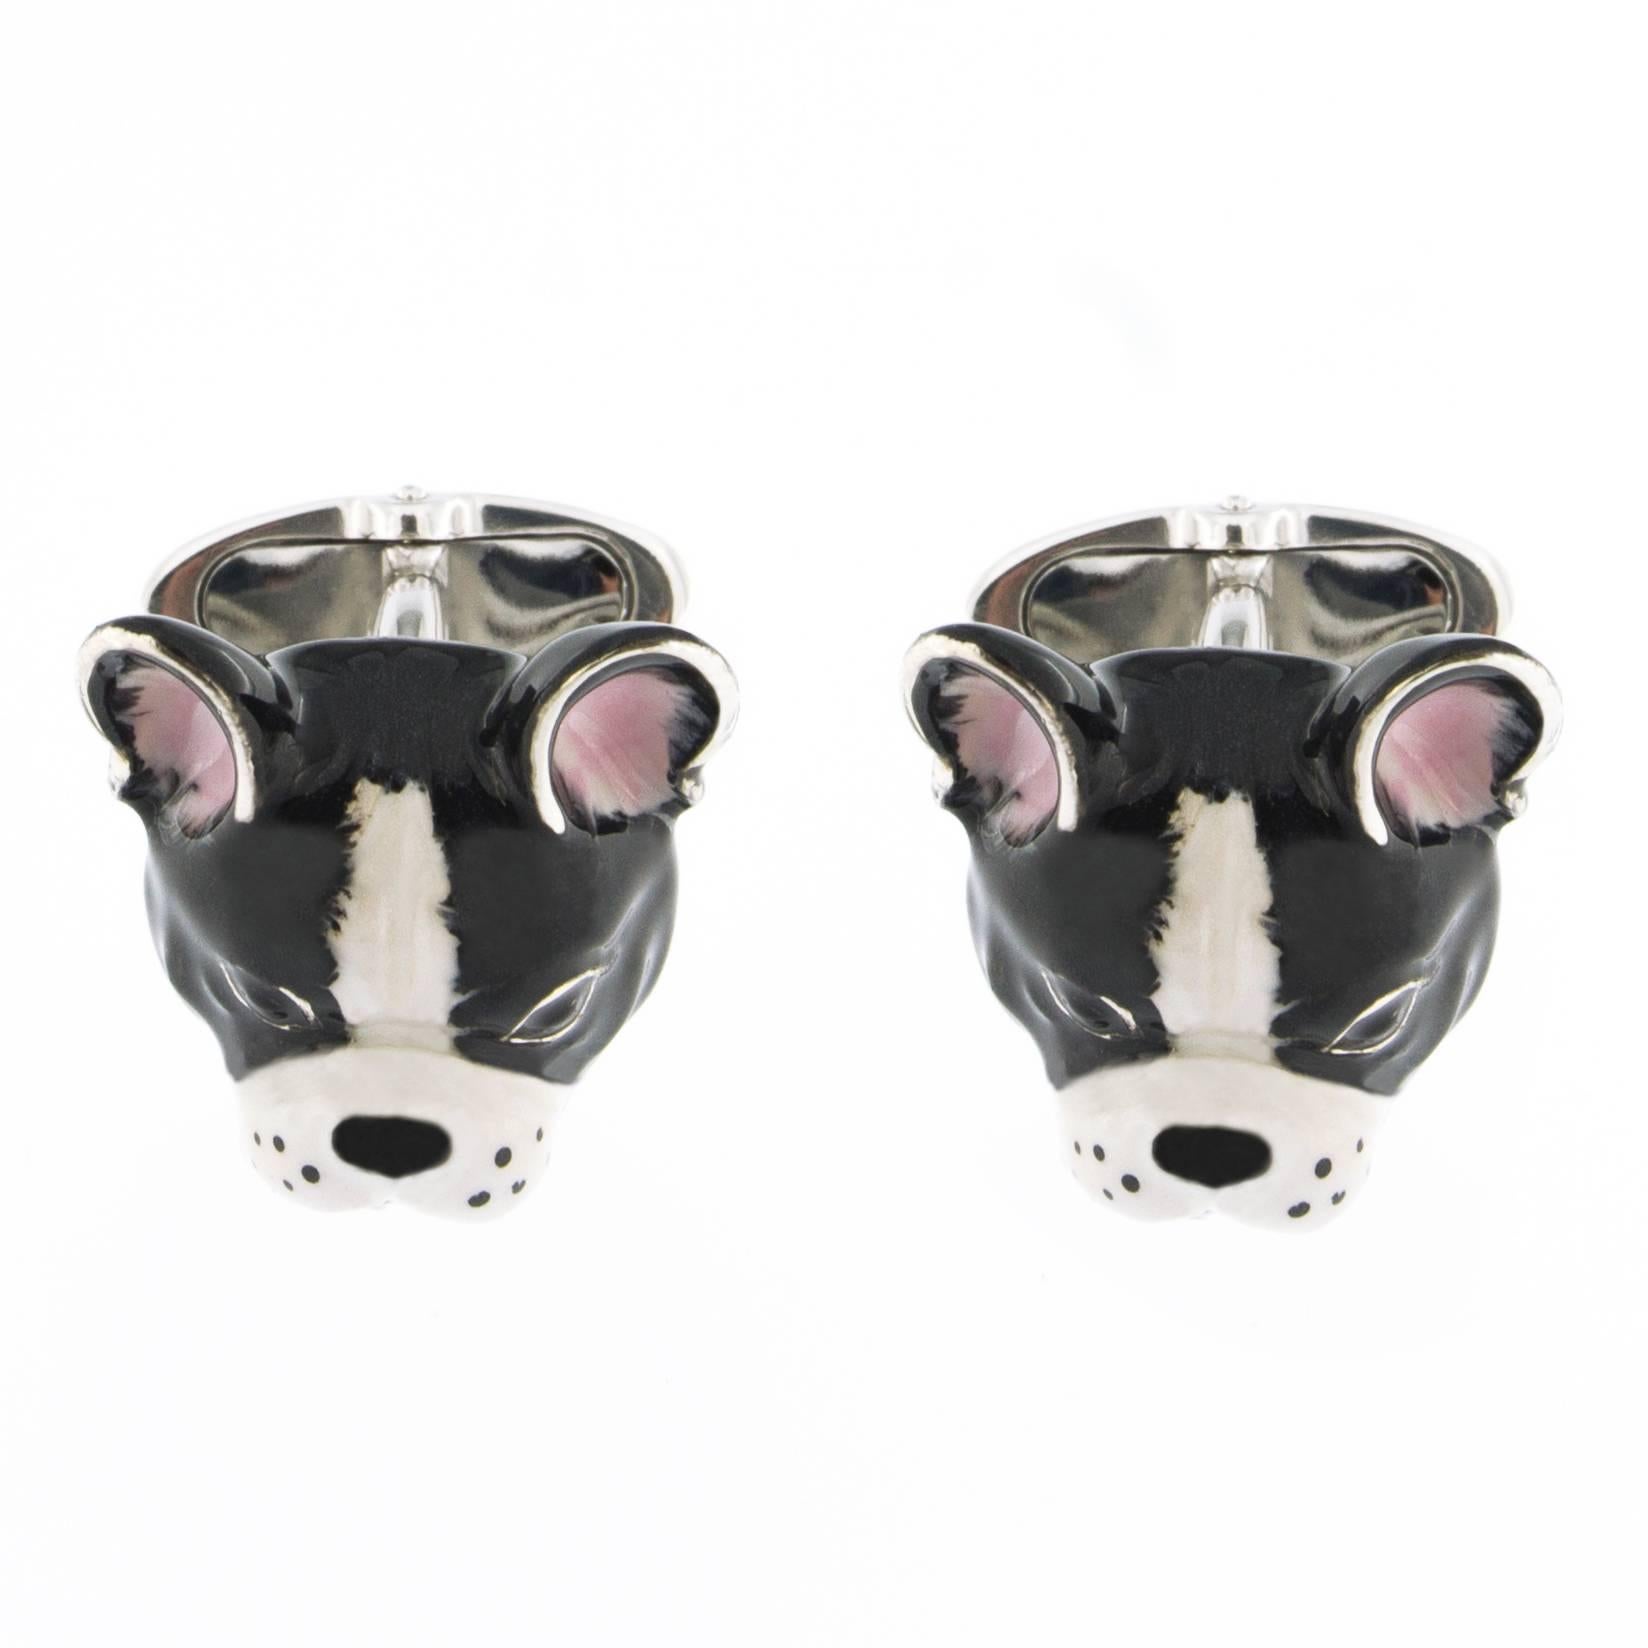 Jona design collection, hand crafted in Italy, Sterling Silver dog Cufflinks with black and white enamel. Toggle back.

Dimensions:
L 0.77 in /  W 0.59 in / D 0.53 in
L 19.5 / W 15.04 in / D 13.23 mm

All Jona jewelry is new and has never been